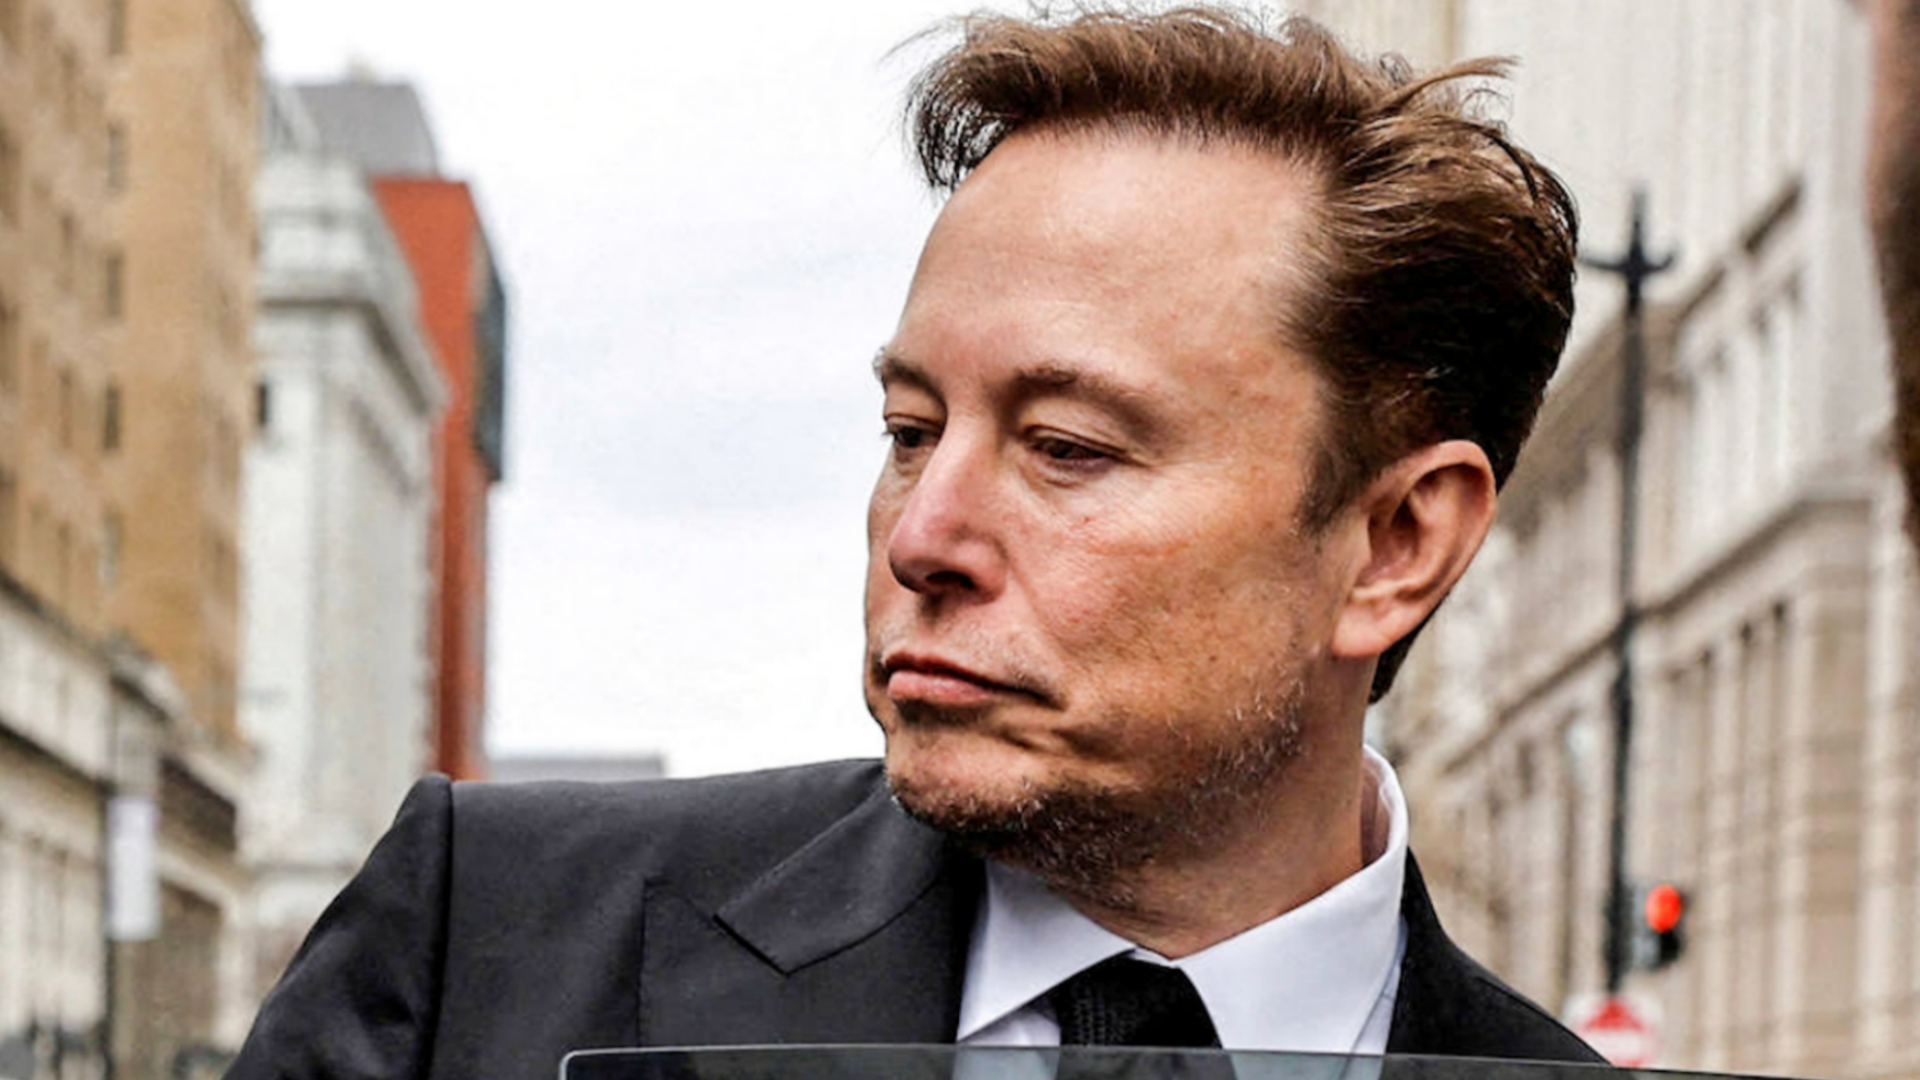 Breaking: Elon Musk says child gender surgeries should be banned